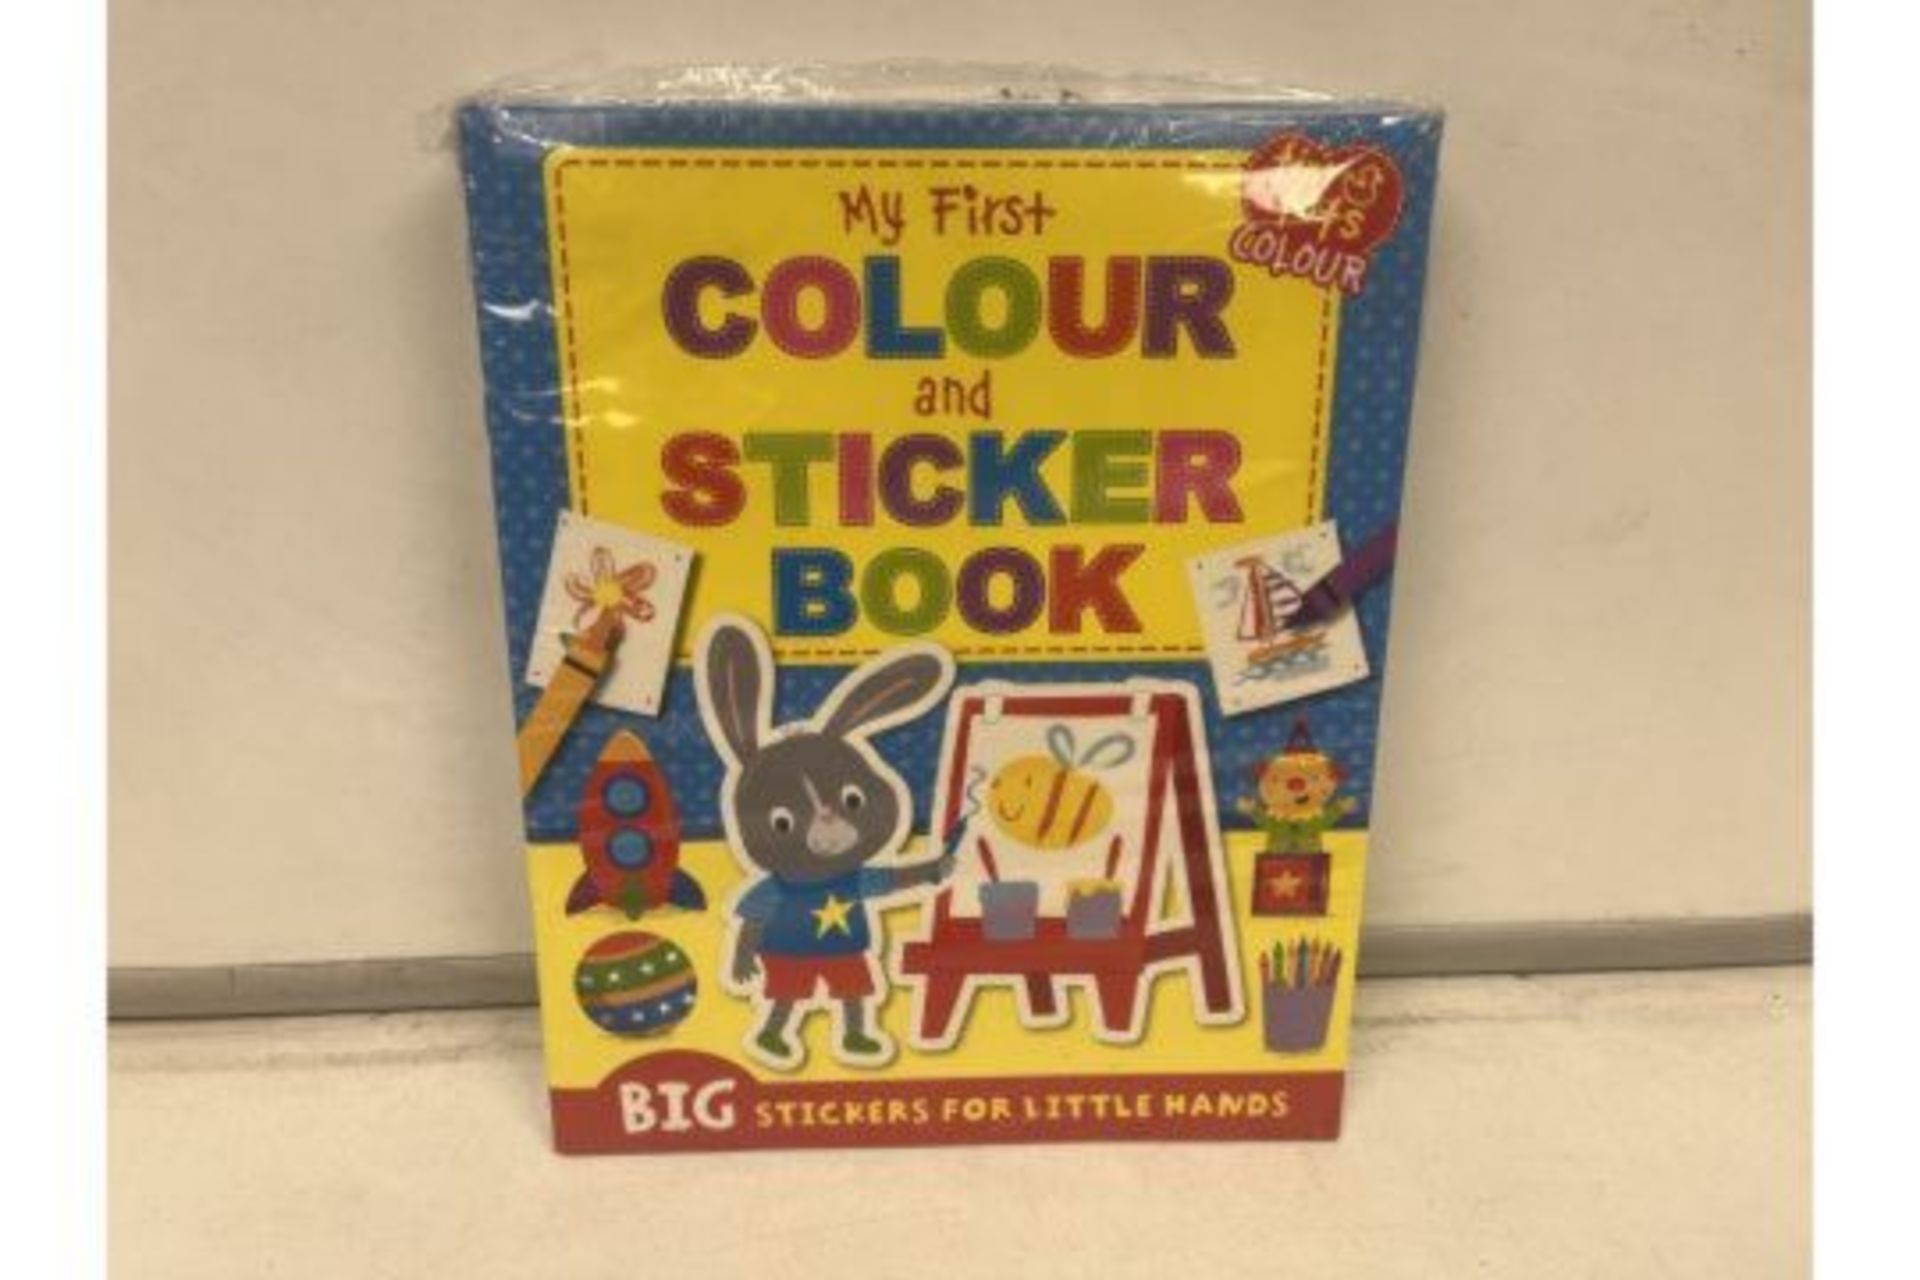 25 X NEW PACKAGED MY FIRST COLOUR STICKER BOOKS. BIG STICKERS FOR LITTLE HANDS. PRICE MARKED AT £3.